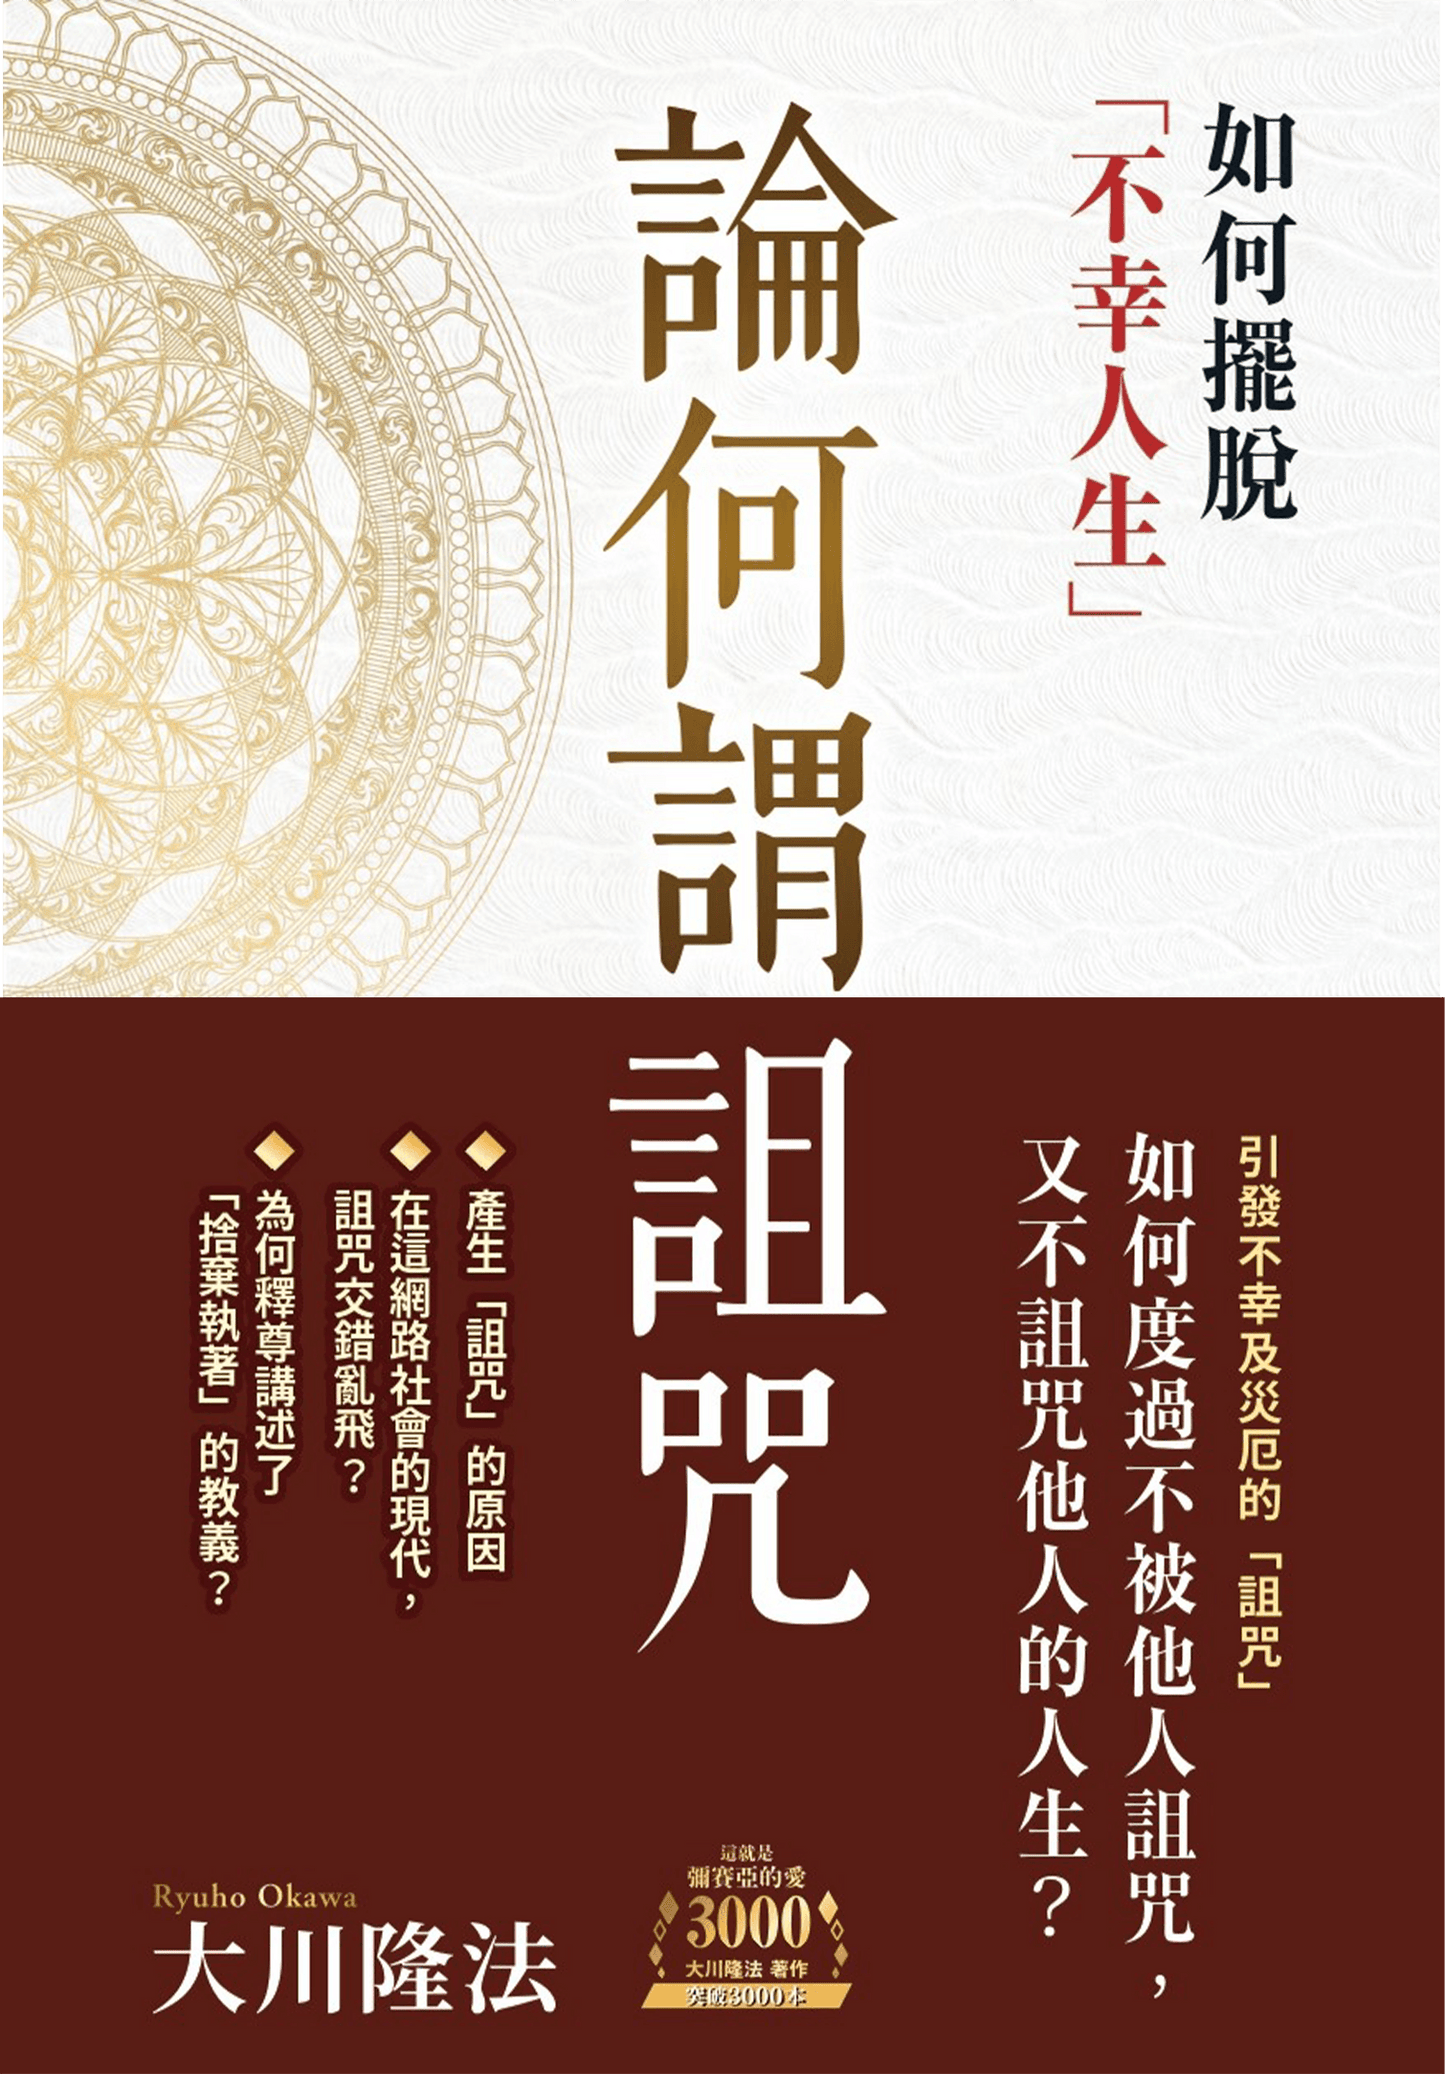 Book, The Spiritual Truth About Curses and Spells : How to Get Out of an Unhappy Life, Ryuho Okawa, Chinese Traditional - IRH Press International